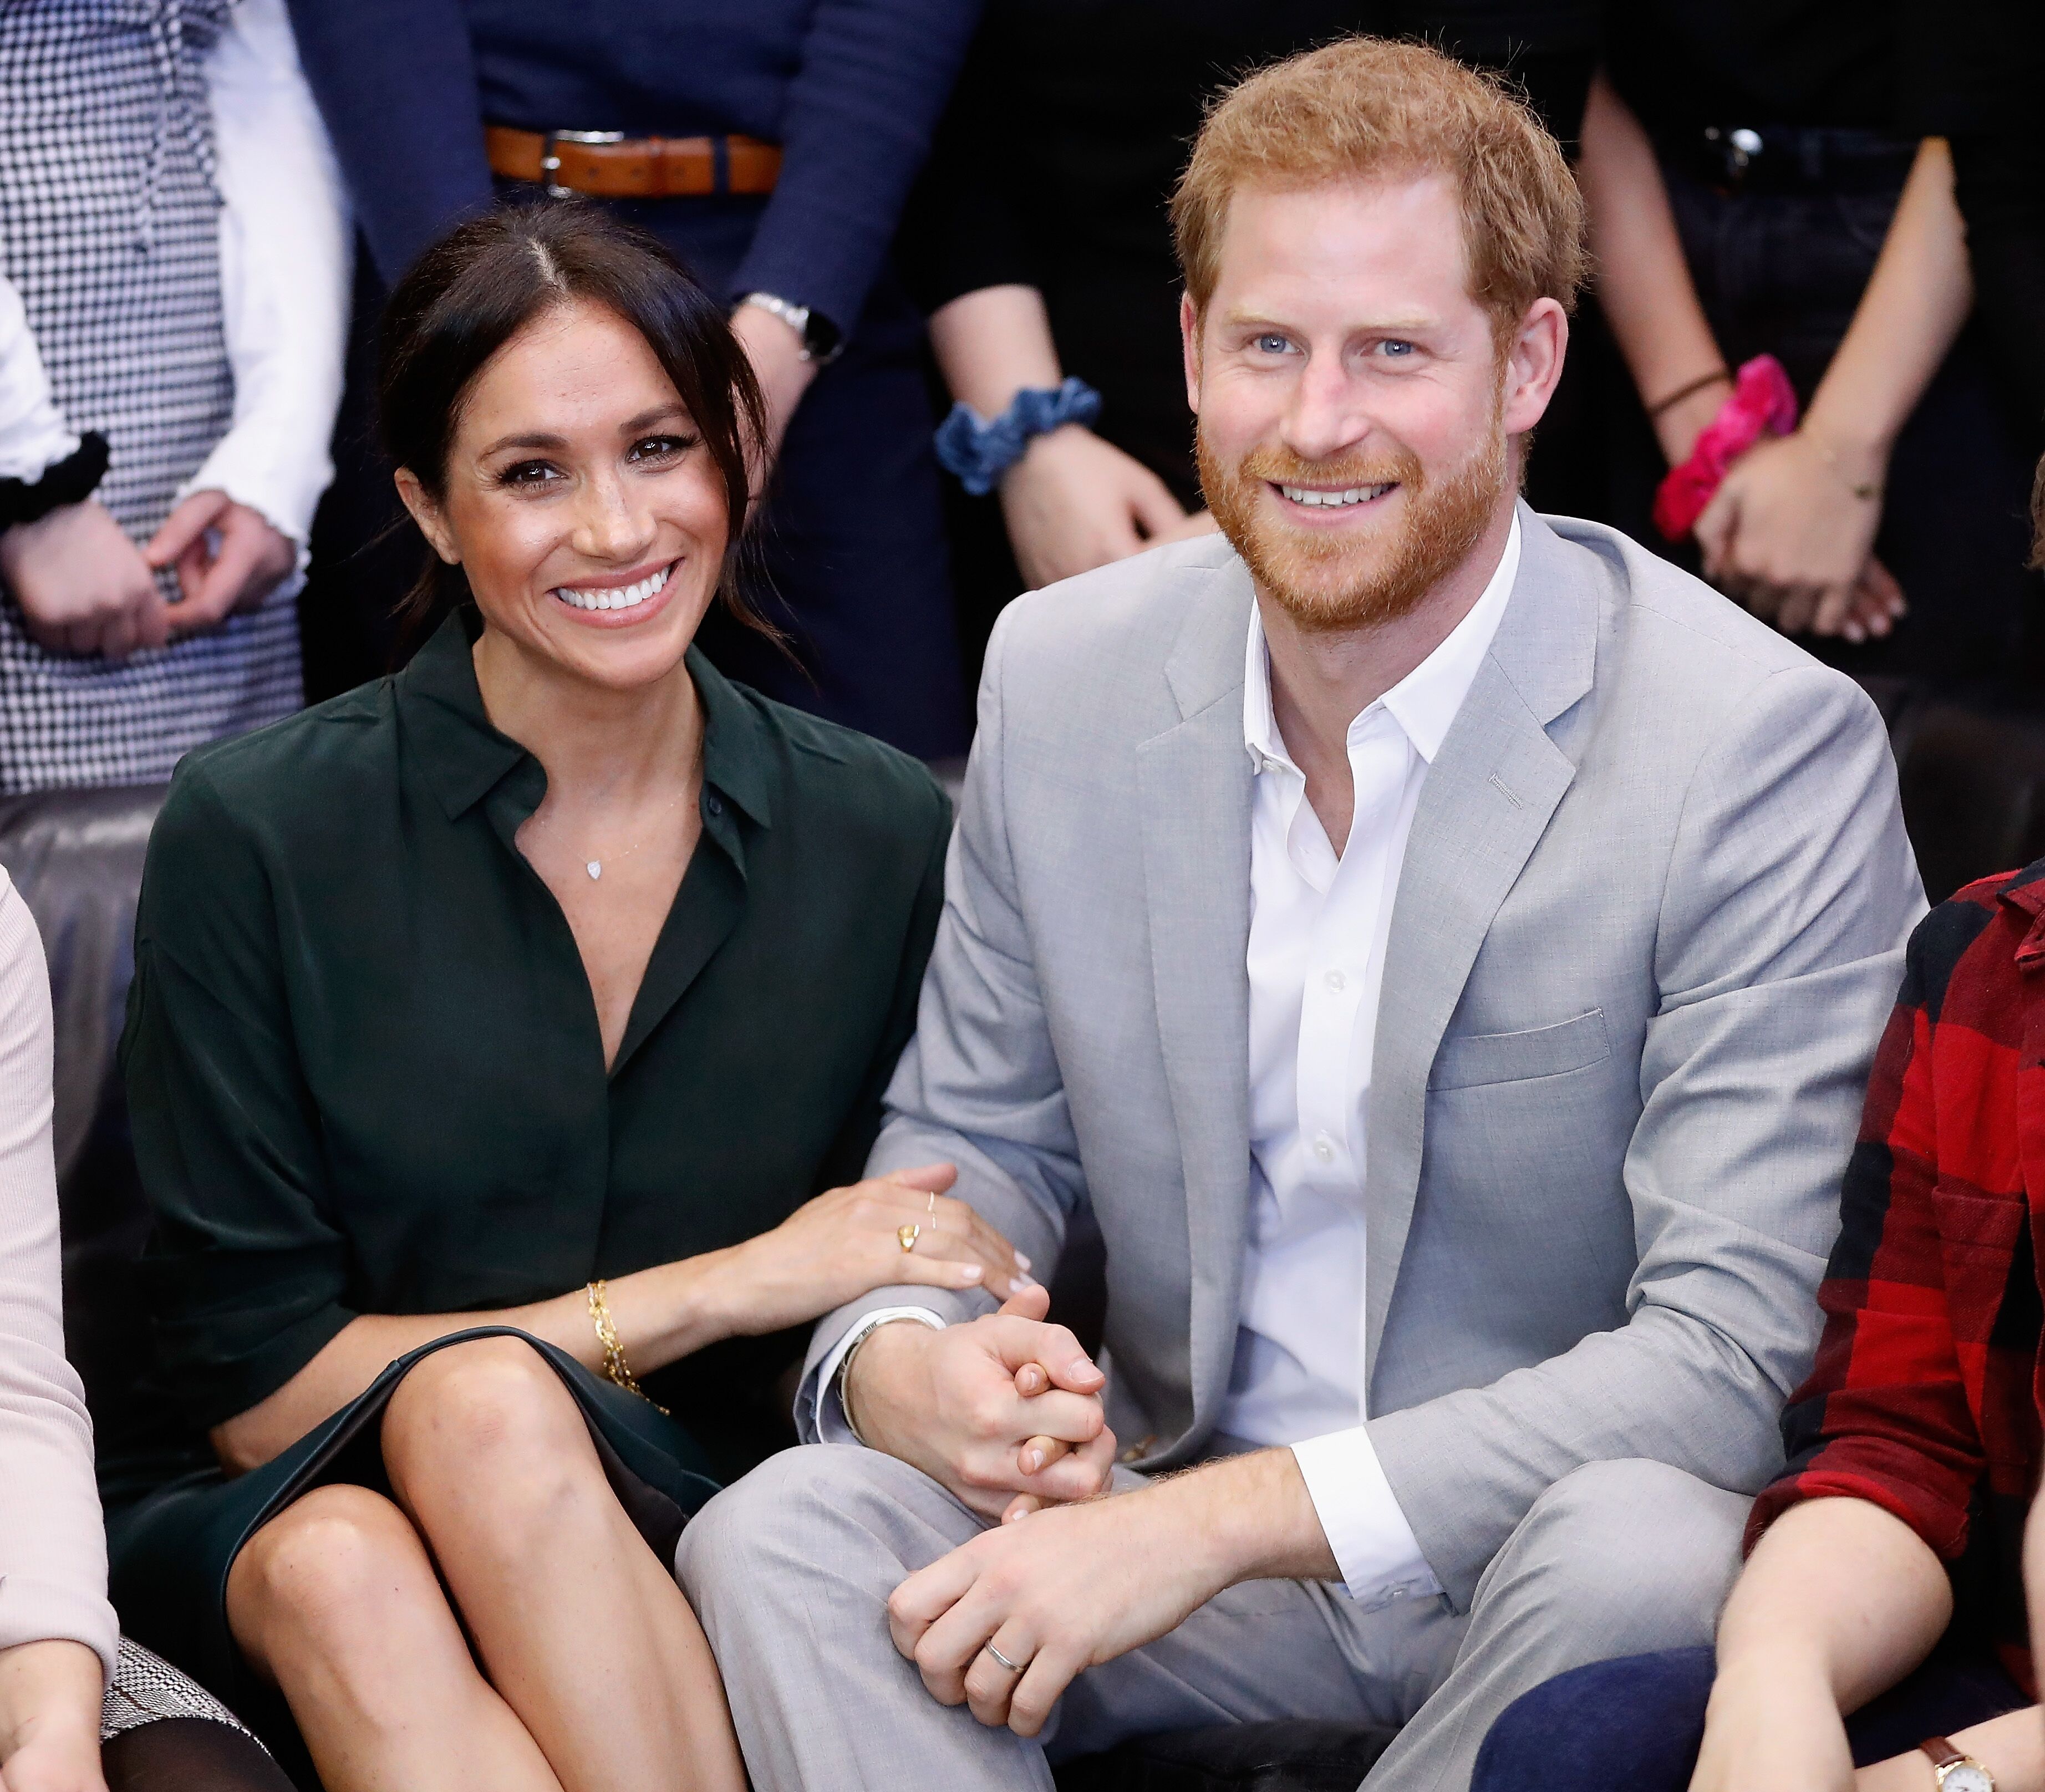 Meghan, Duchess of Sussex and Prince Harry, Duke of Sussex make an official visit to the Joff Youth Centre in Peacehaven, Sussex in Peacehaven, United Kingdom | Photo: Getty Images